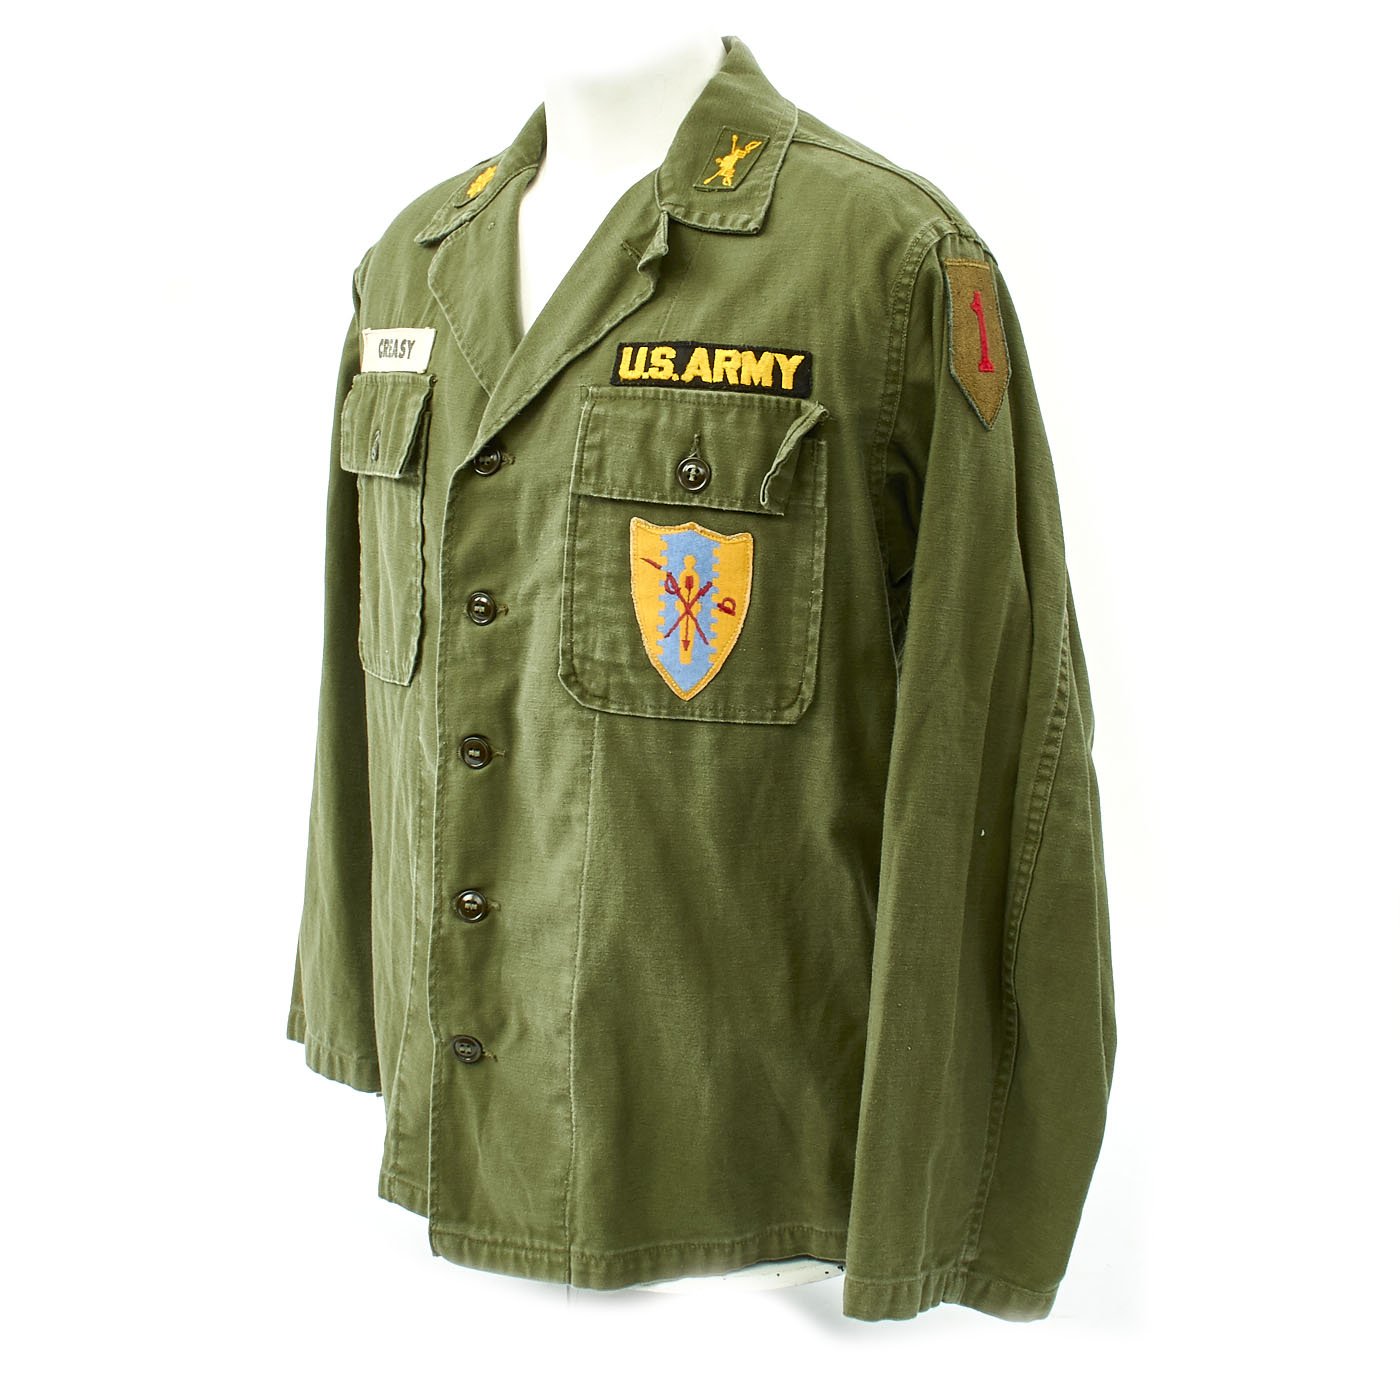 4th infantry division merchandise